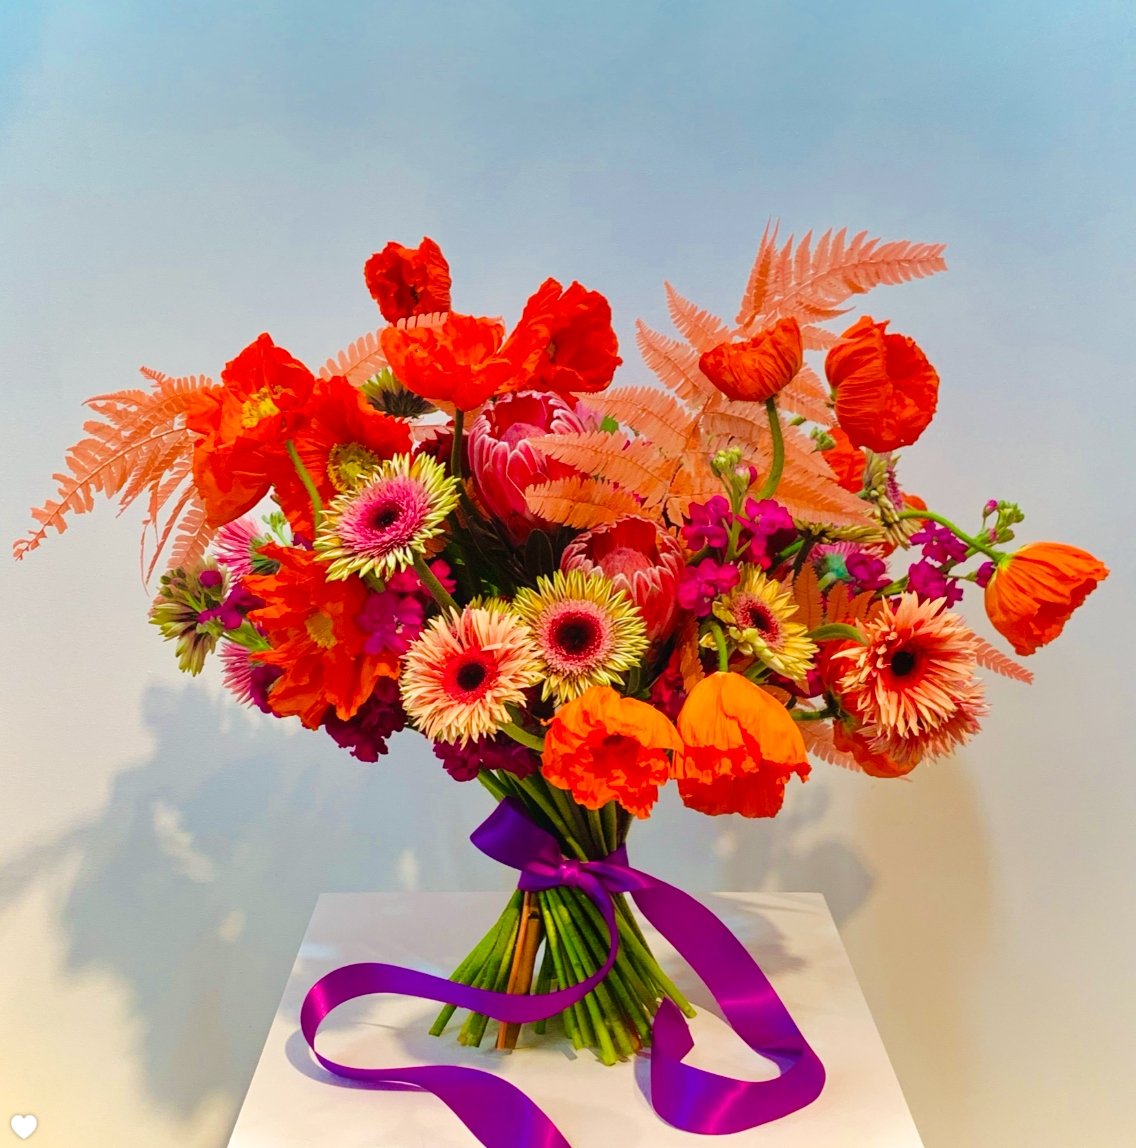 An arrangement of colorful flowers with a purple ribbon from TAKAYASATO.COM.